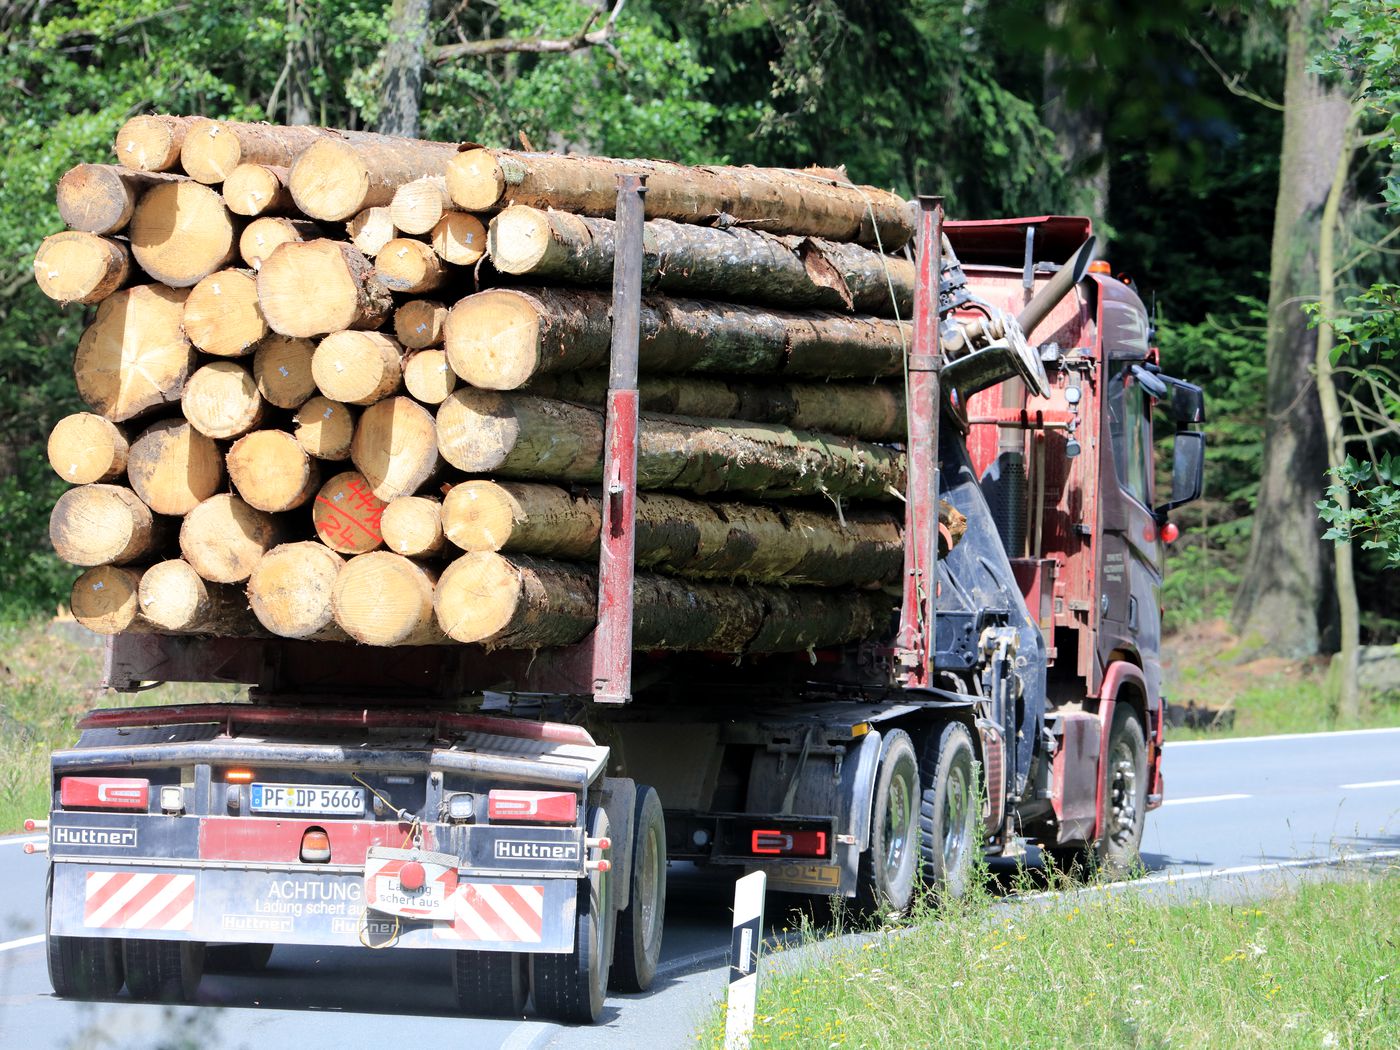 Why are lumber prices skyrocketing? The lumber shortage and housing boom,  explained. - Vox